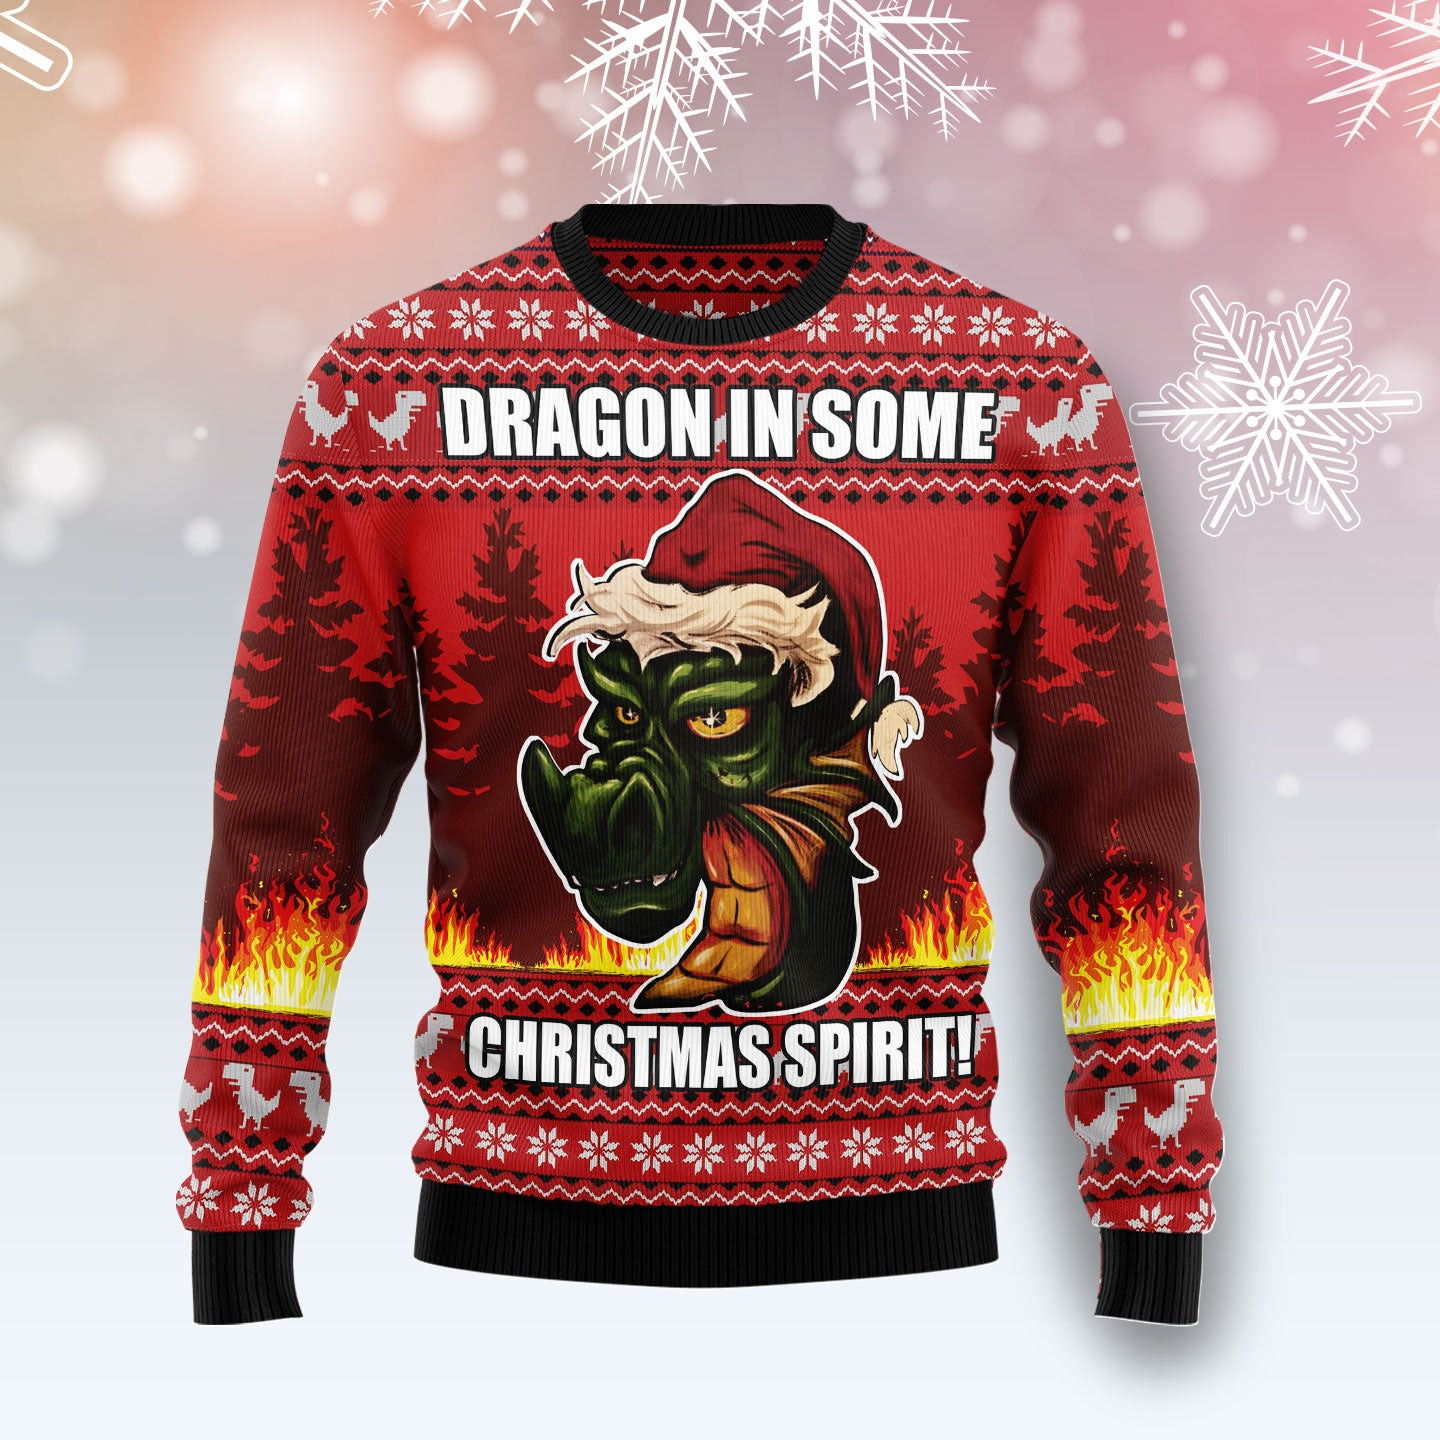 Dragon in some Christmas Spirit Ugly Christmas Sweater, Ugly Sweater For Men Women, Holiday Sweater